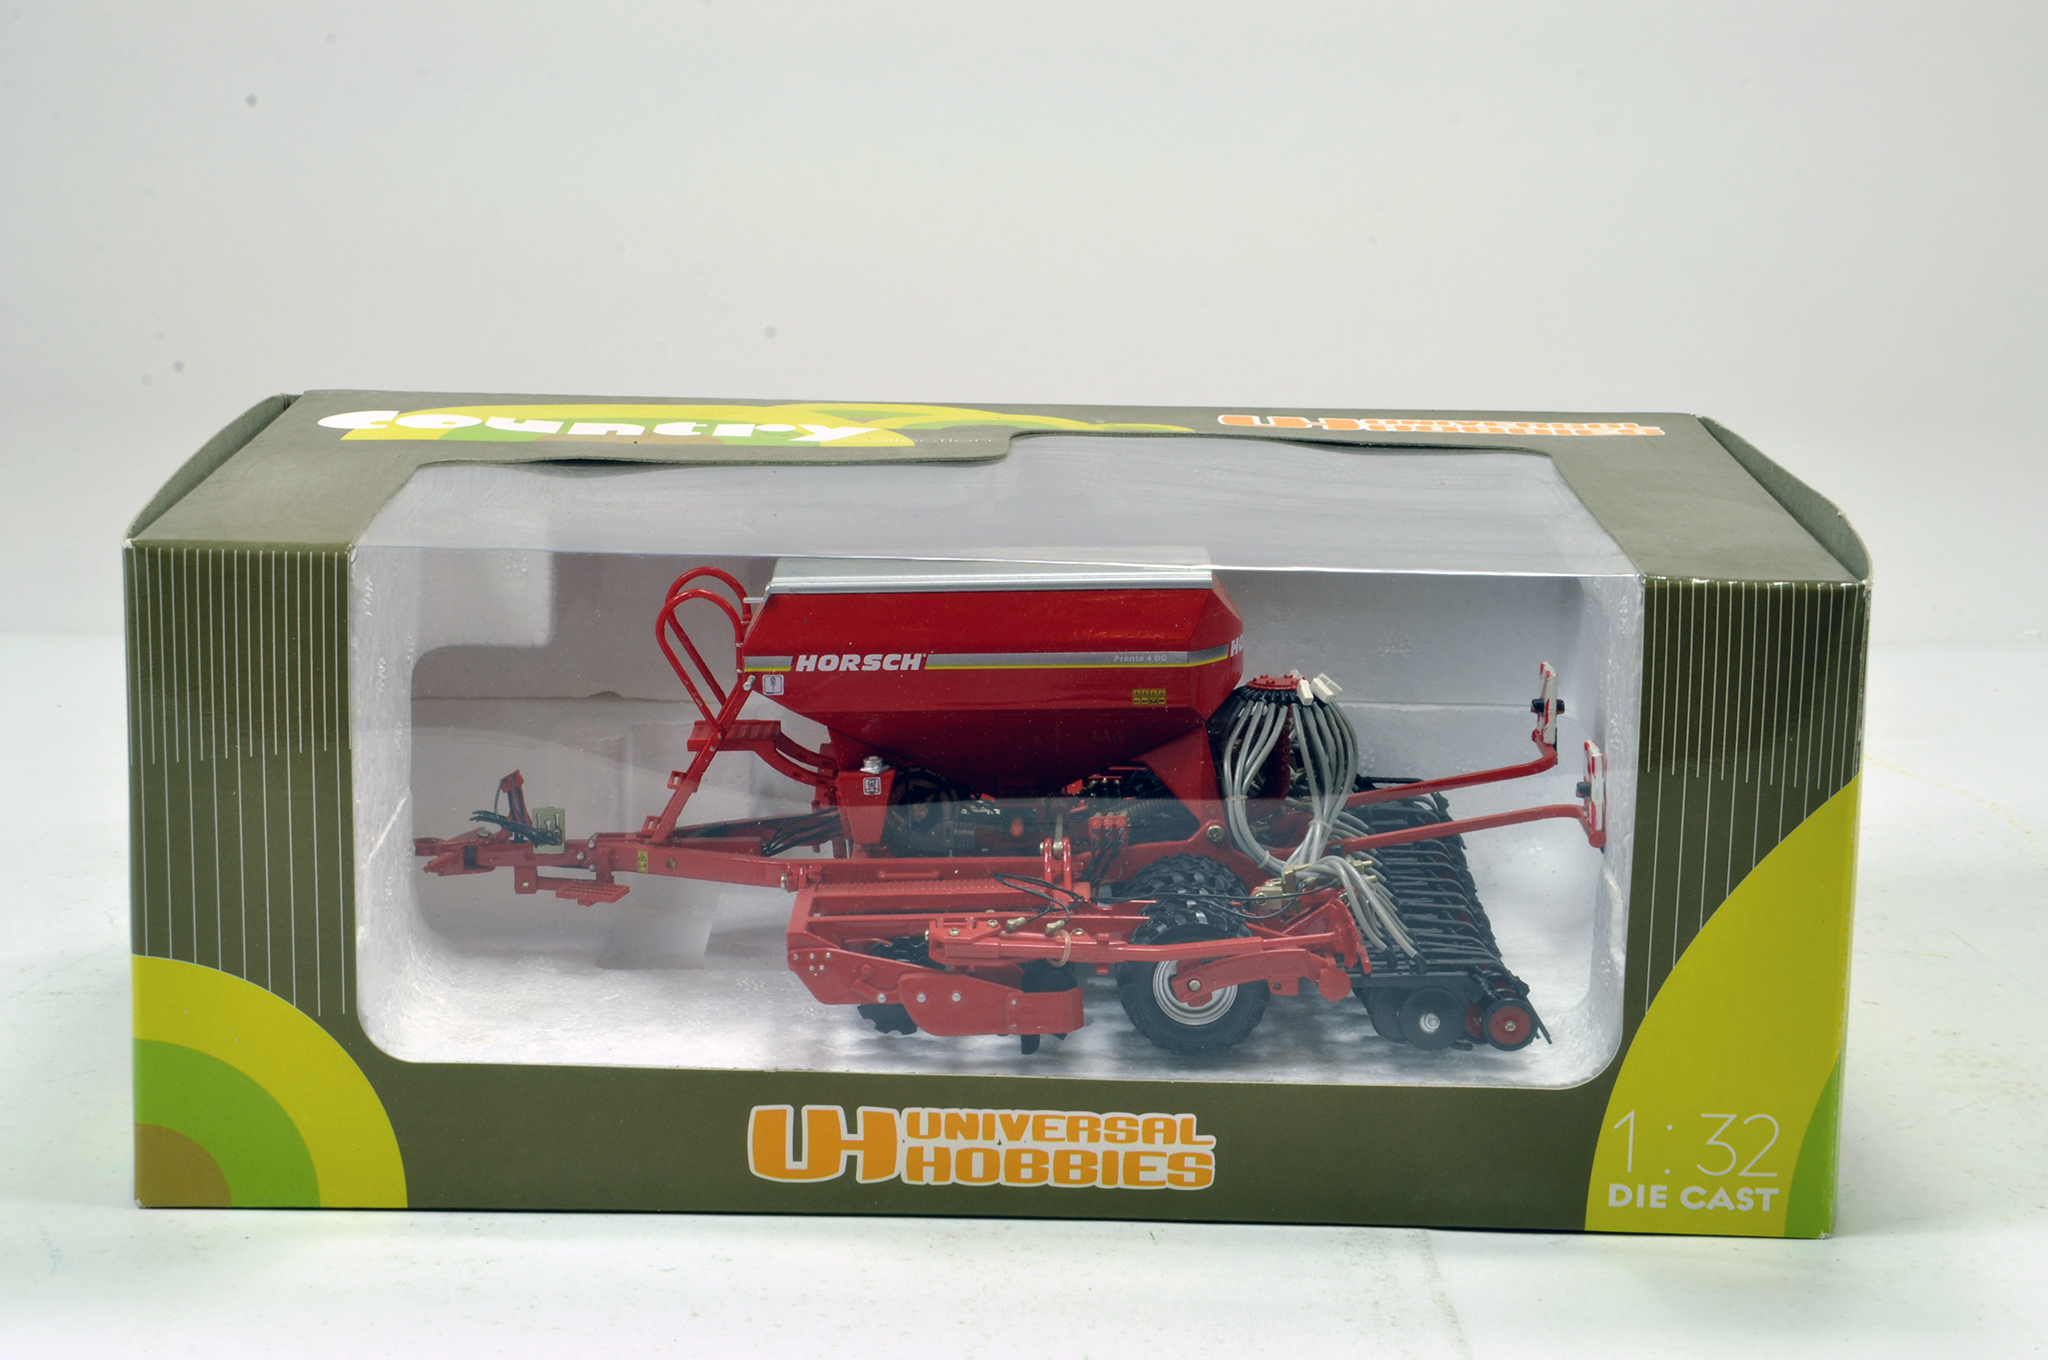 Universal hobbies 1/32 Horsch Pronto Seed Drill. Generally excellent in box.